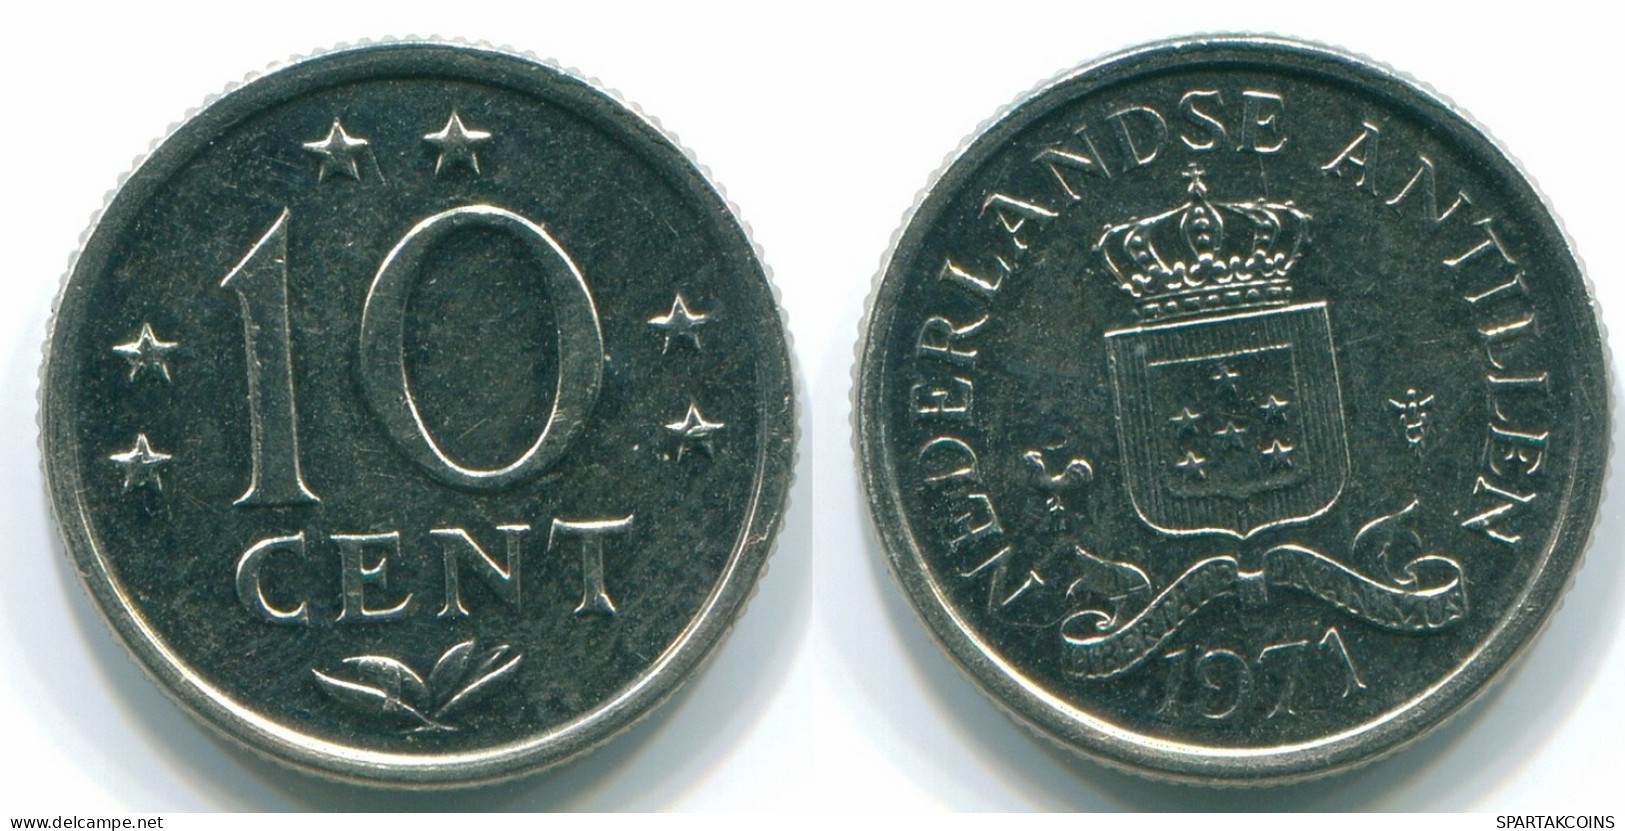 10 CENTS 1971 NETHERLANDS ANTILLES Nickel Colonial Coin #S13403.U.A - Netherlands Antilles